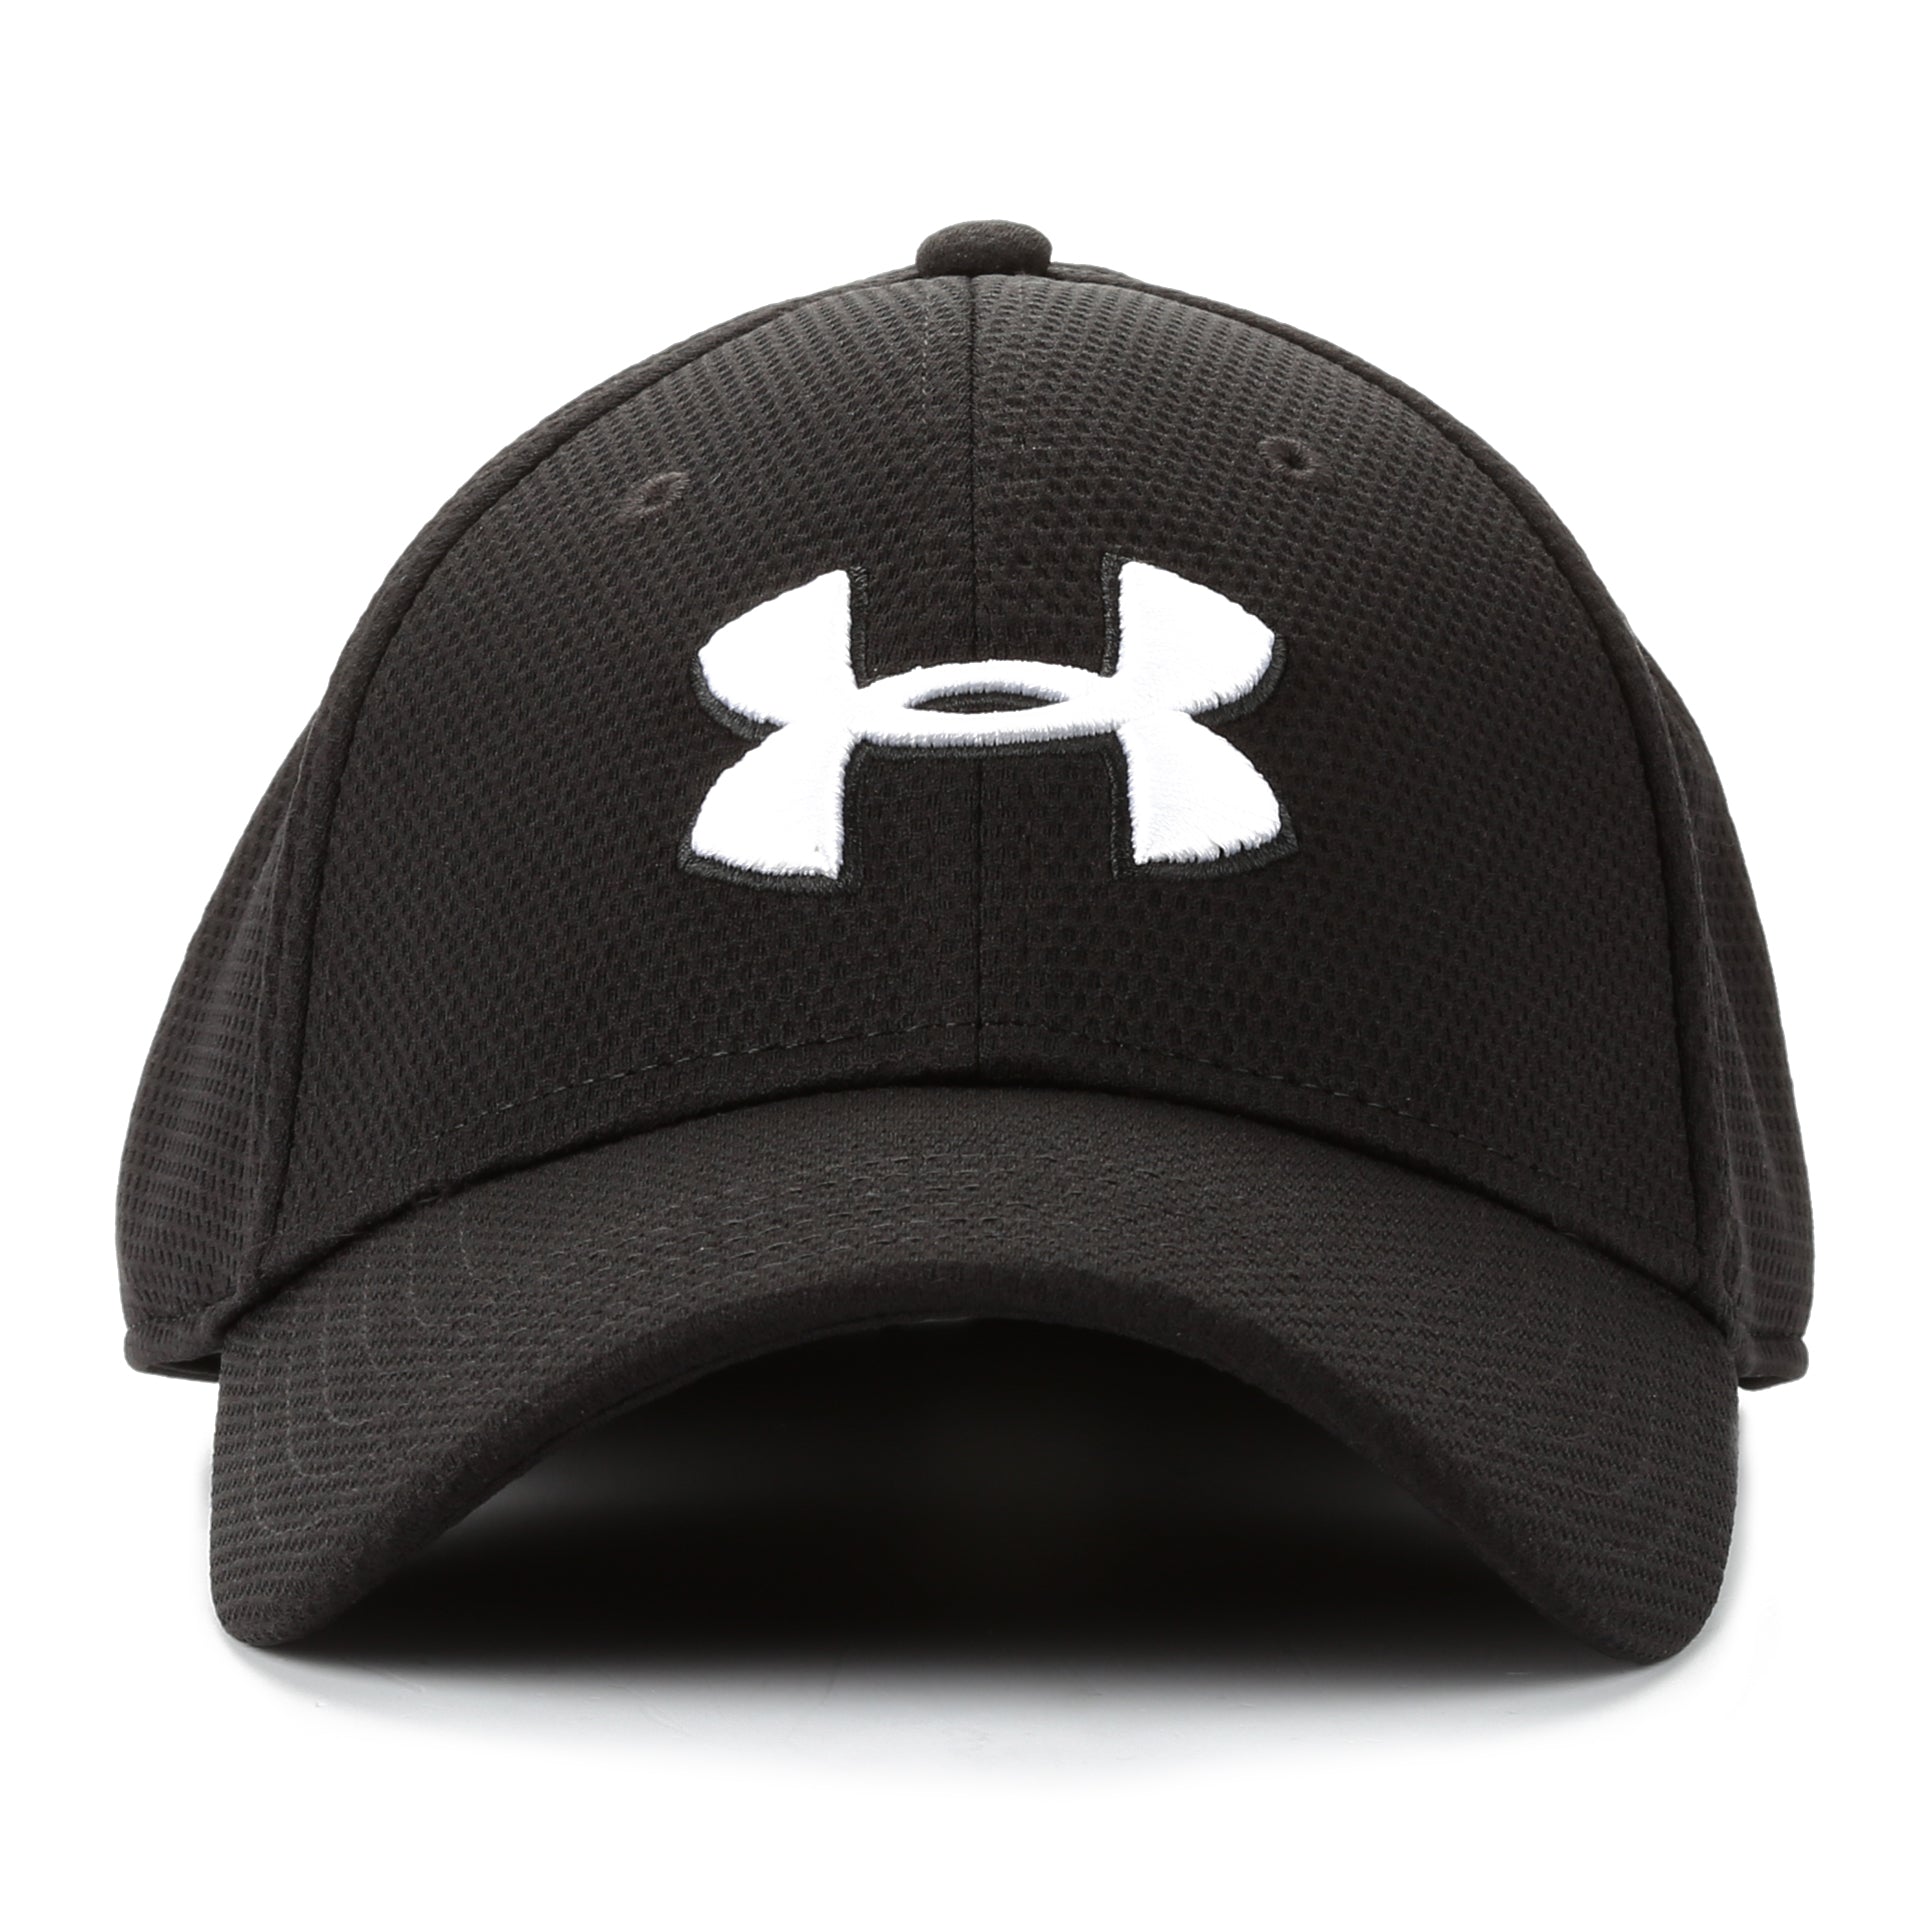 Under Armour Blitzing II Stretch Fit Hat - Black/White - New Star